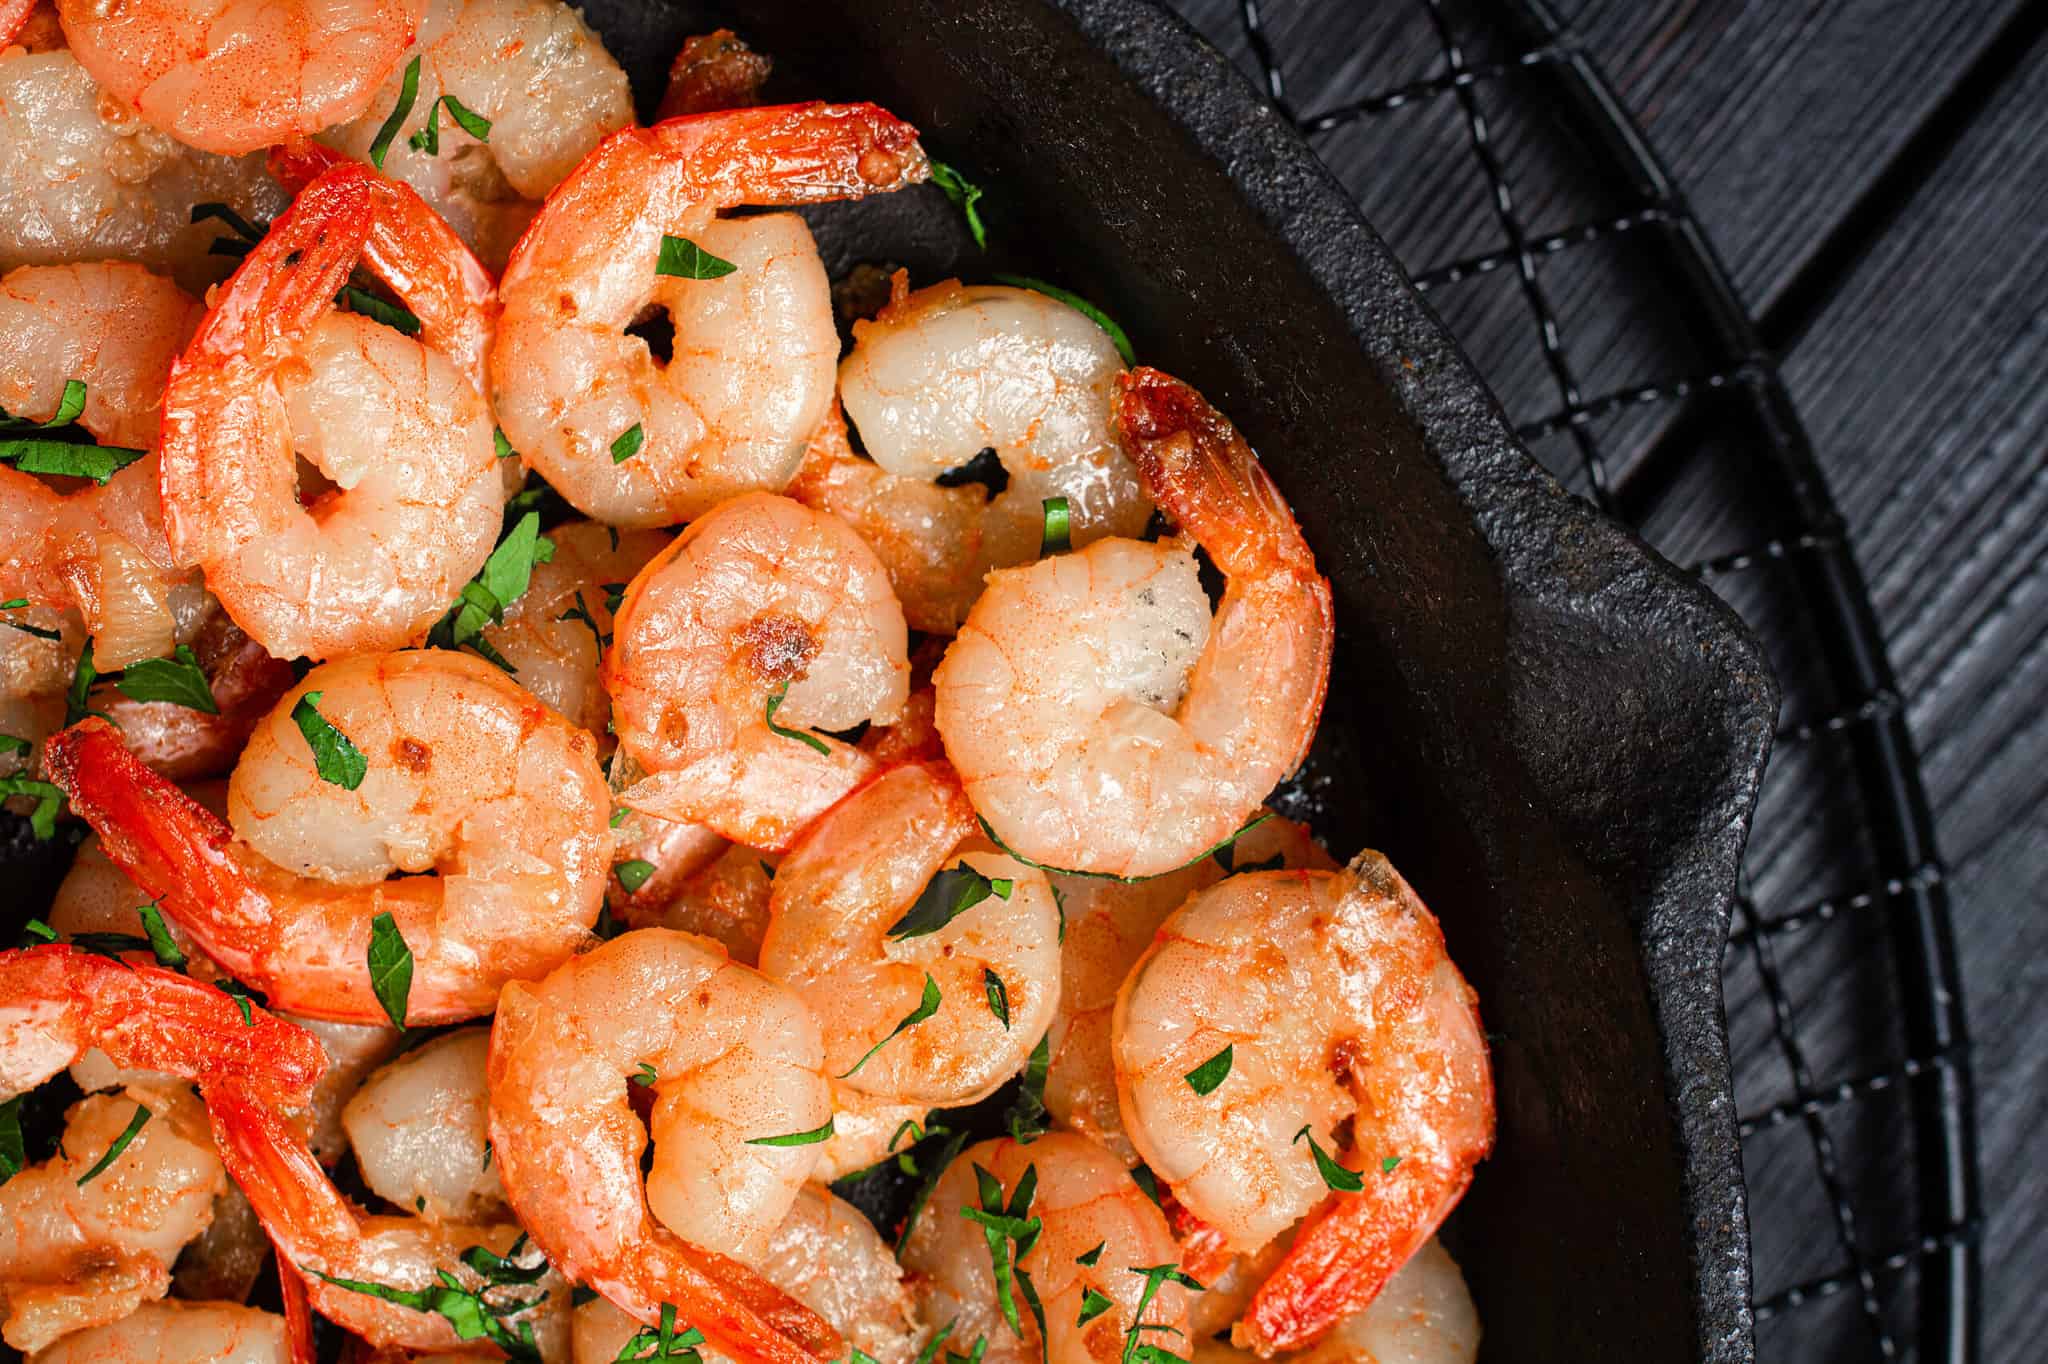 Try This Amazing Garlic Lime Shrimp and Pasta Recipe